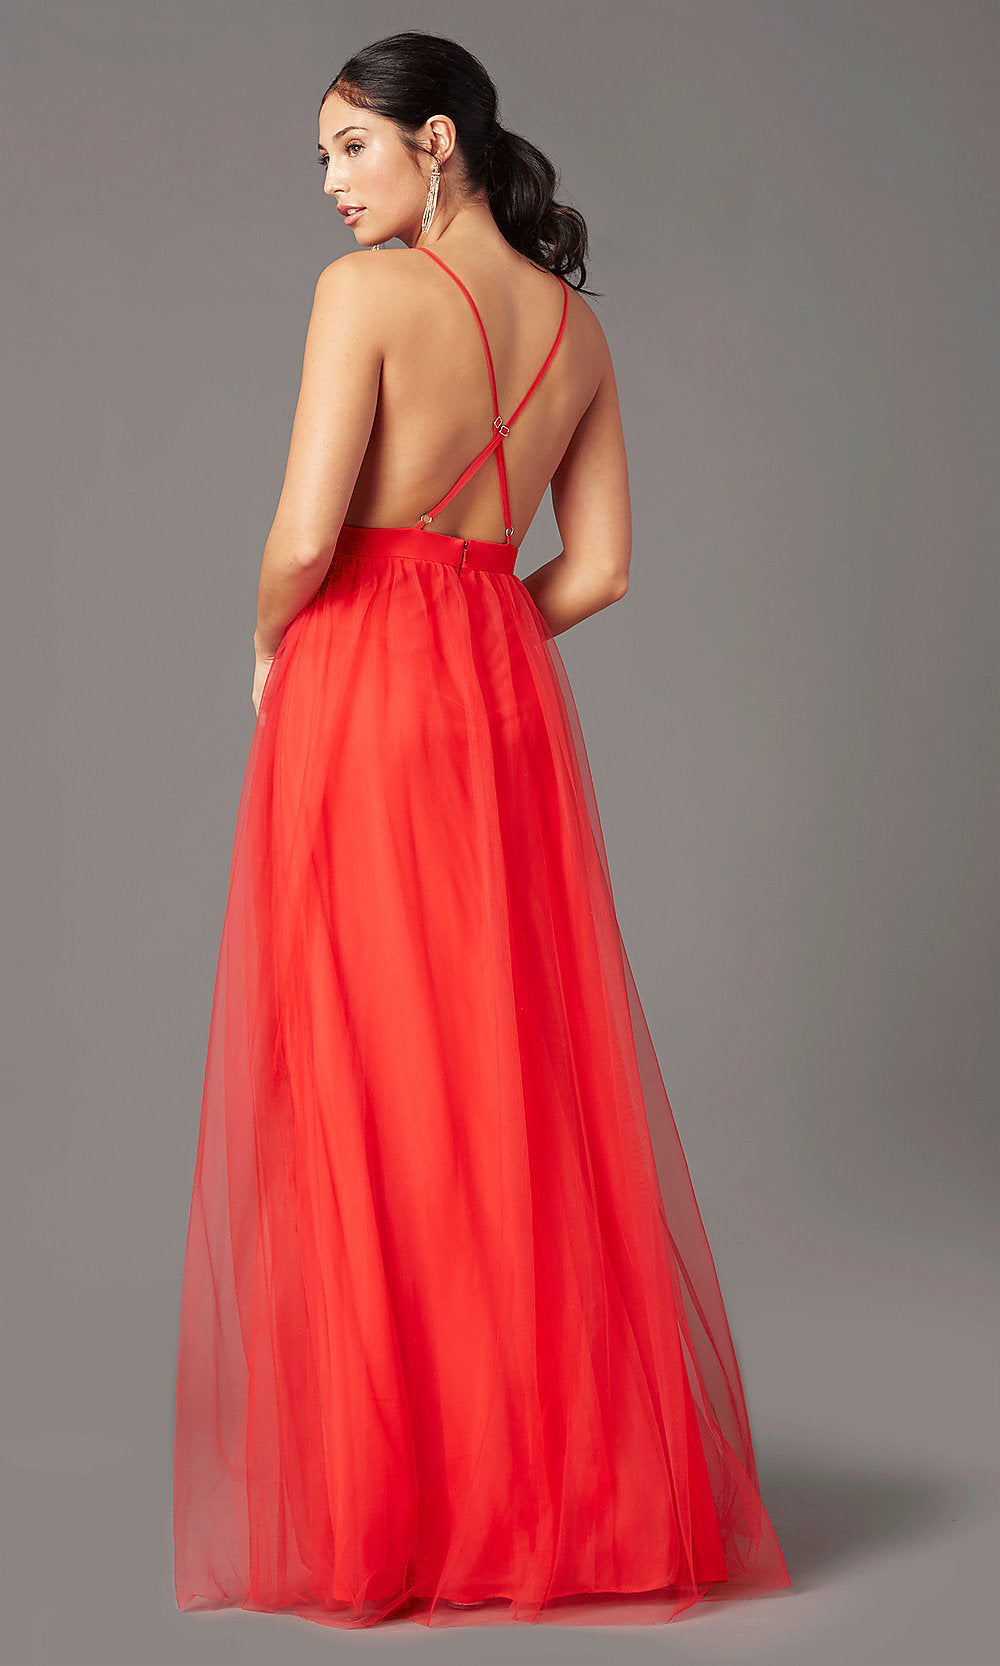 Off-the-Shoulder Long Casual Maxi Dress - PromGirl